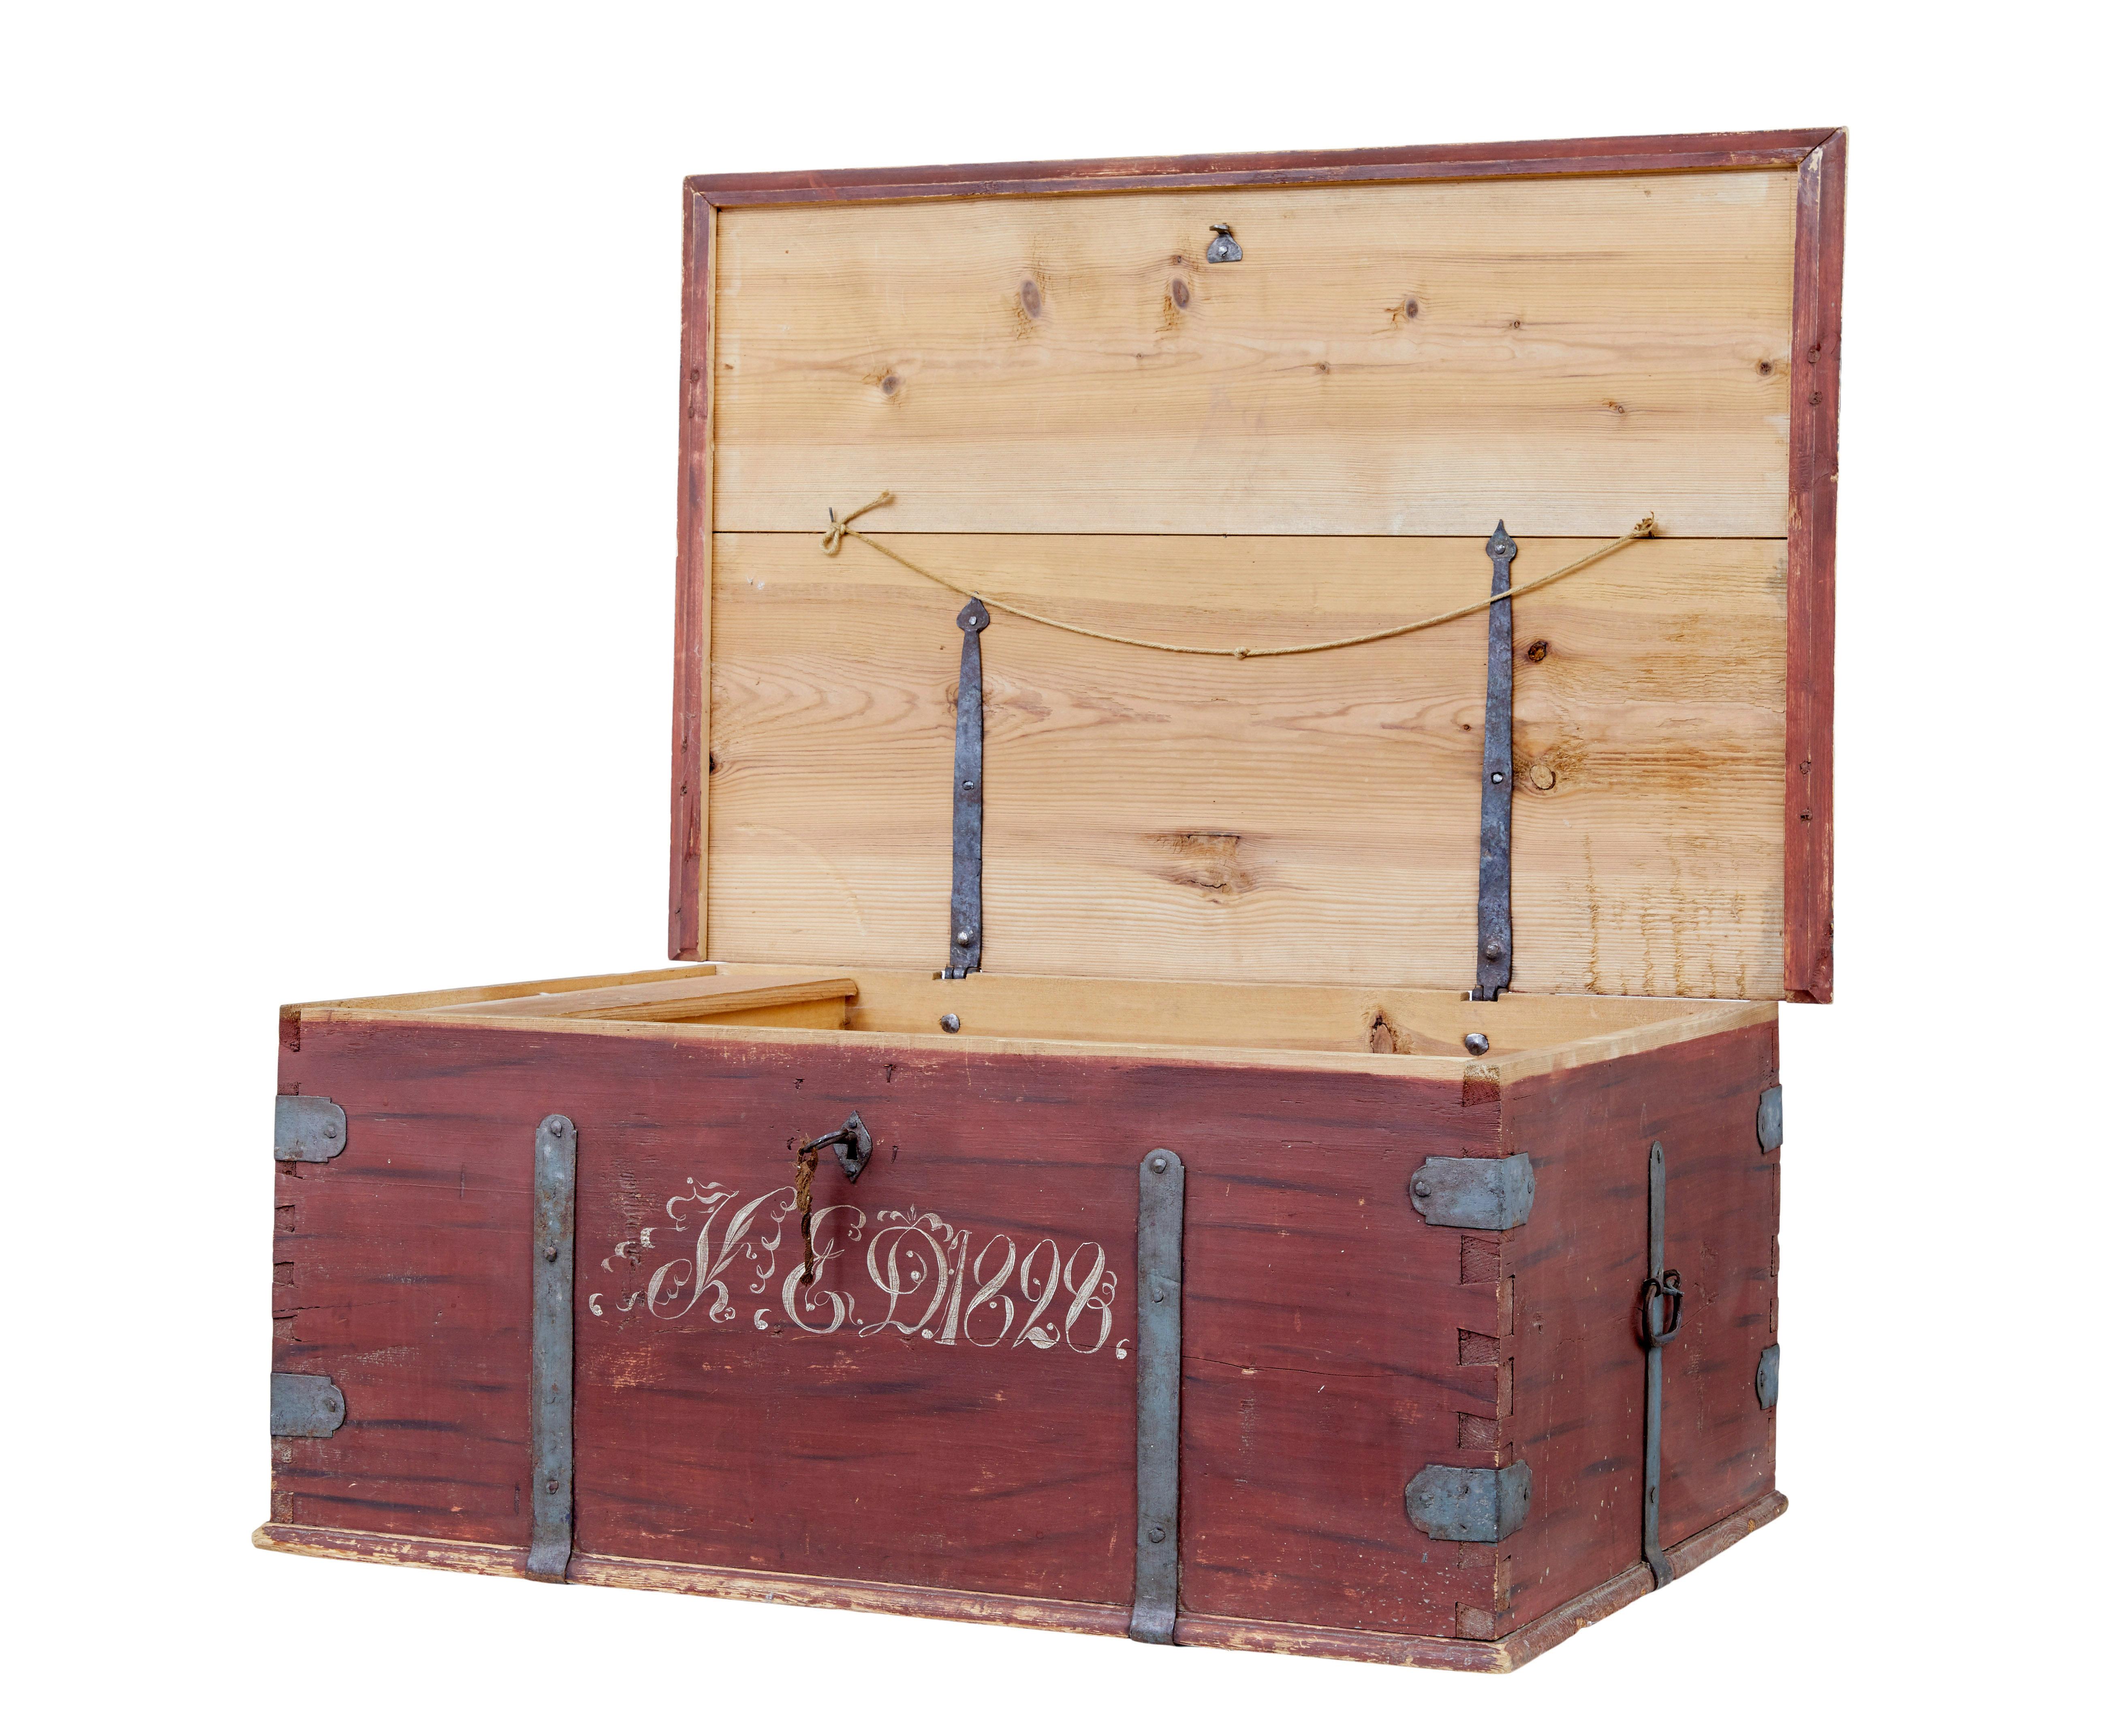 Early 19th century painted pine blanket box circa 1828.

Fine example of the traditional method of storage in sweden, utilising the plentiful pine and hand decorating.

Rectangular box with a flat lid, which makes it ideal to double up as a coffee